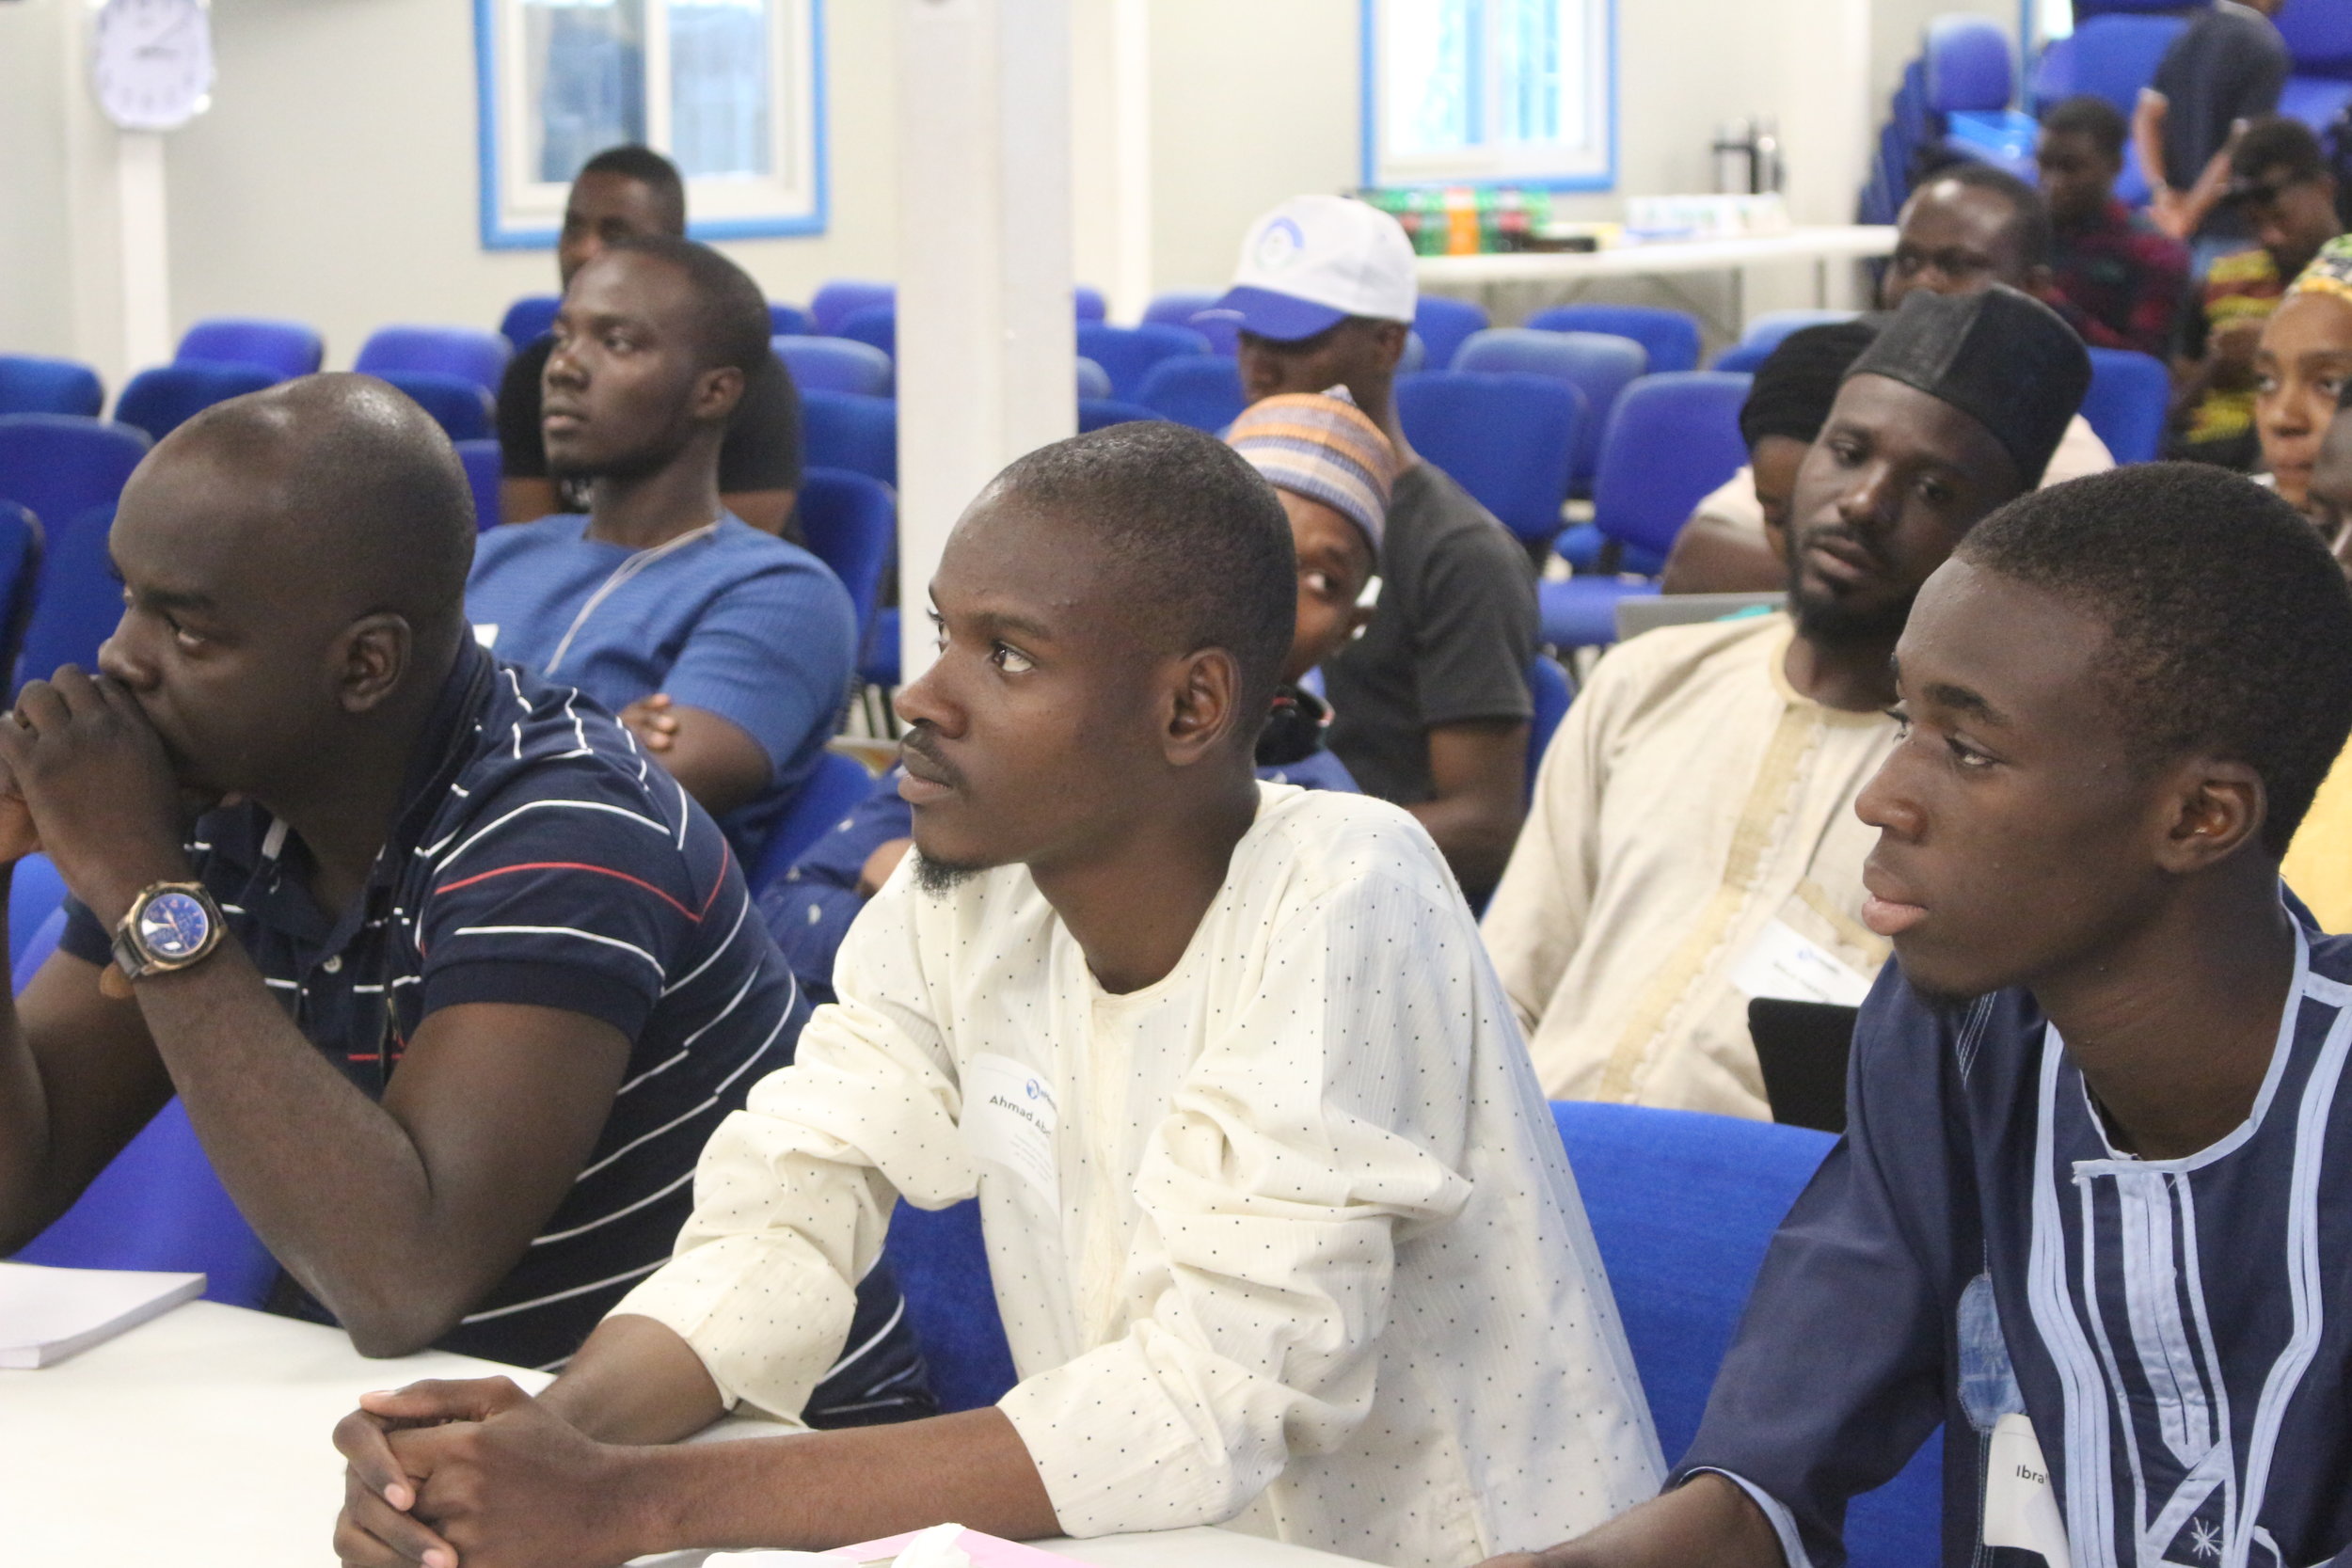     A cross section of the audience listening with rapt attention    